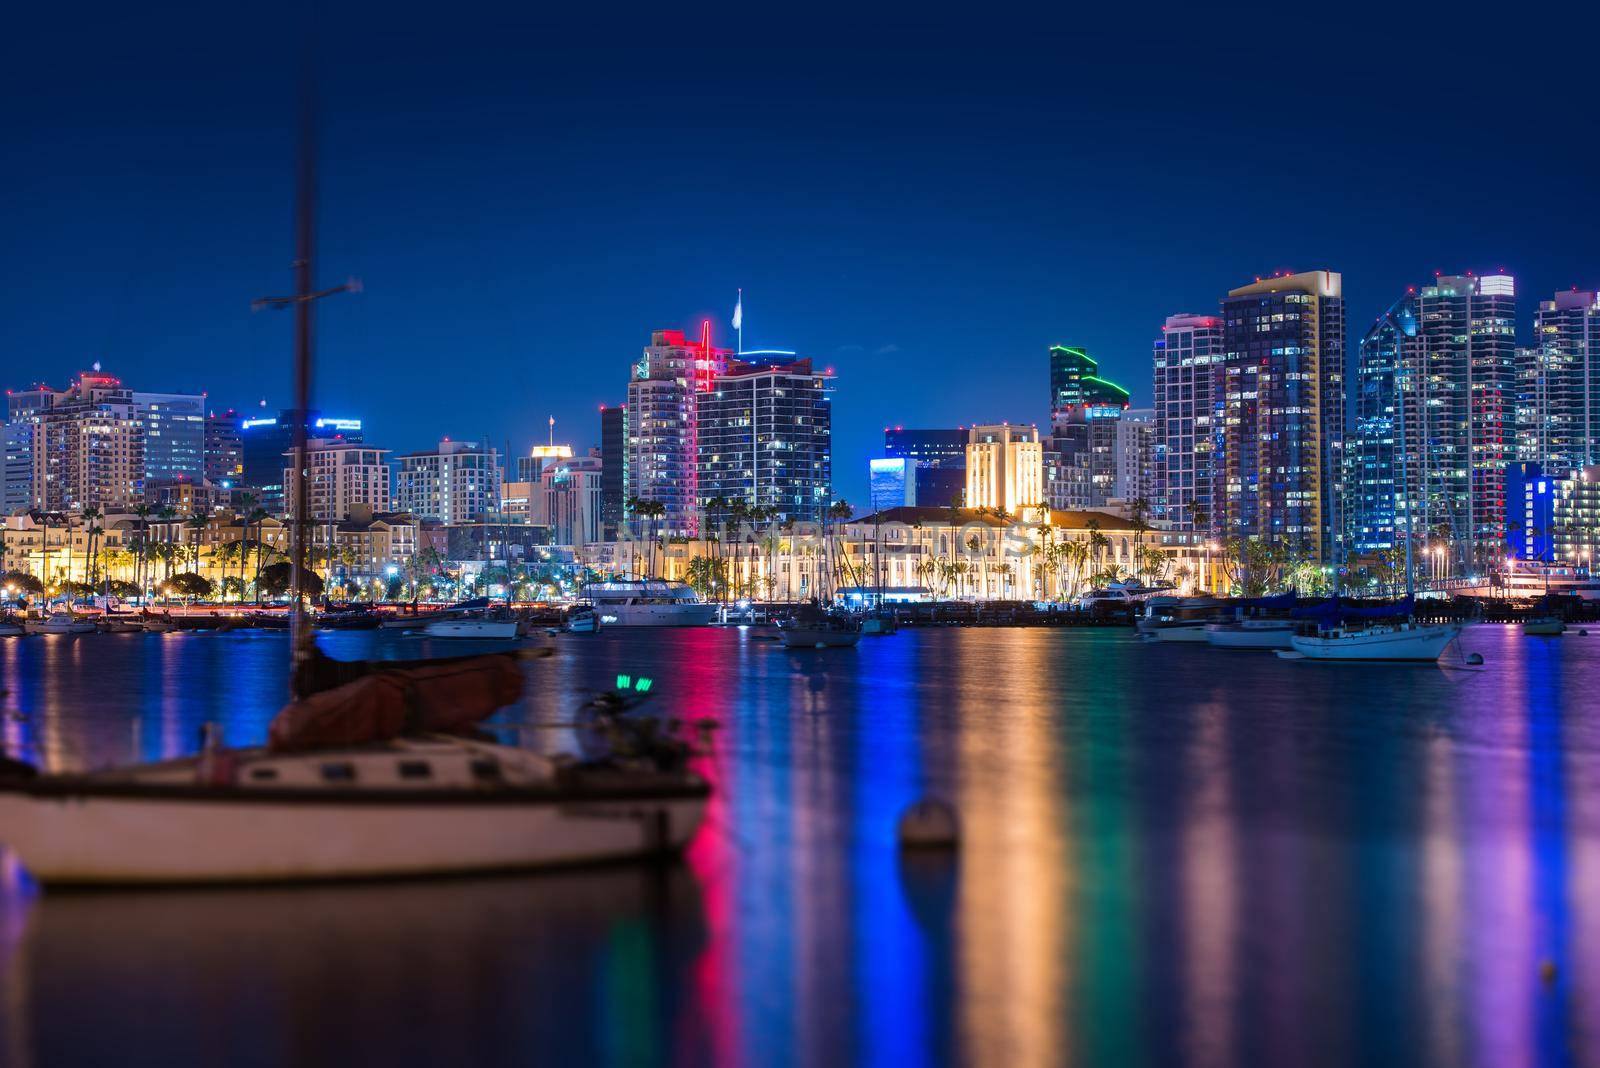 San Diego Skyline at Night. San Diego, California, United States. Colorful Downtown and the Bay. by welcomia